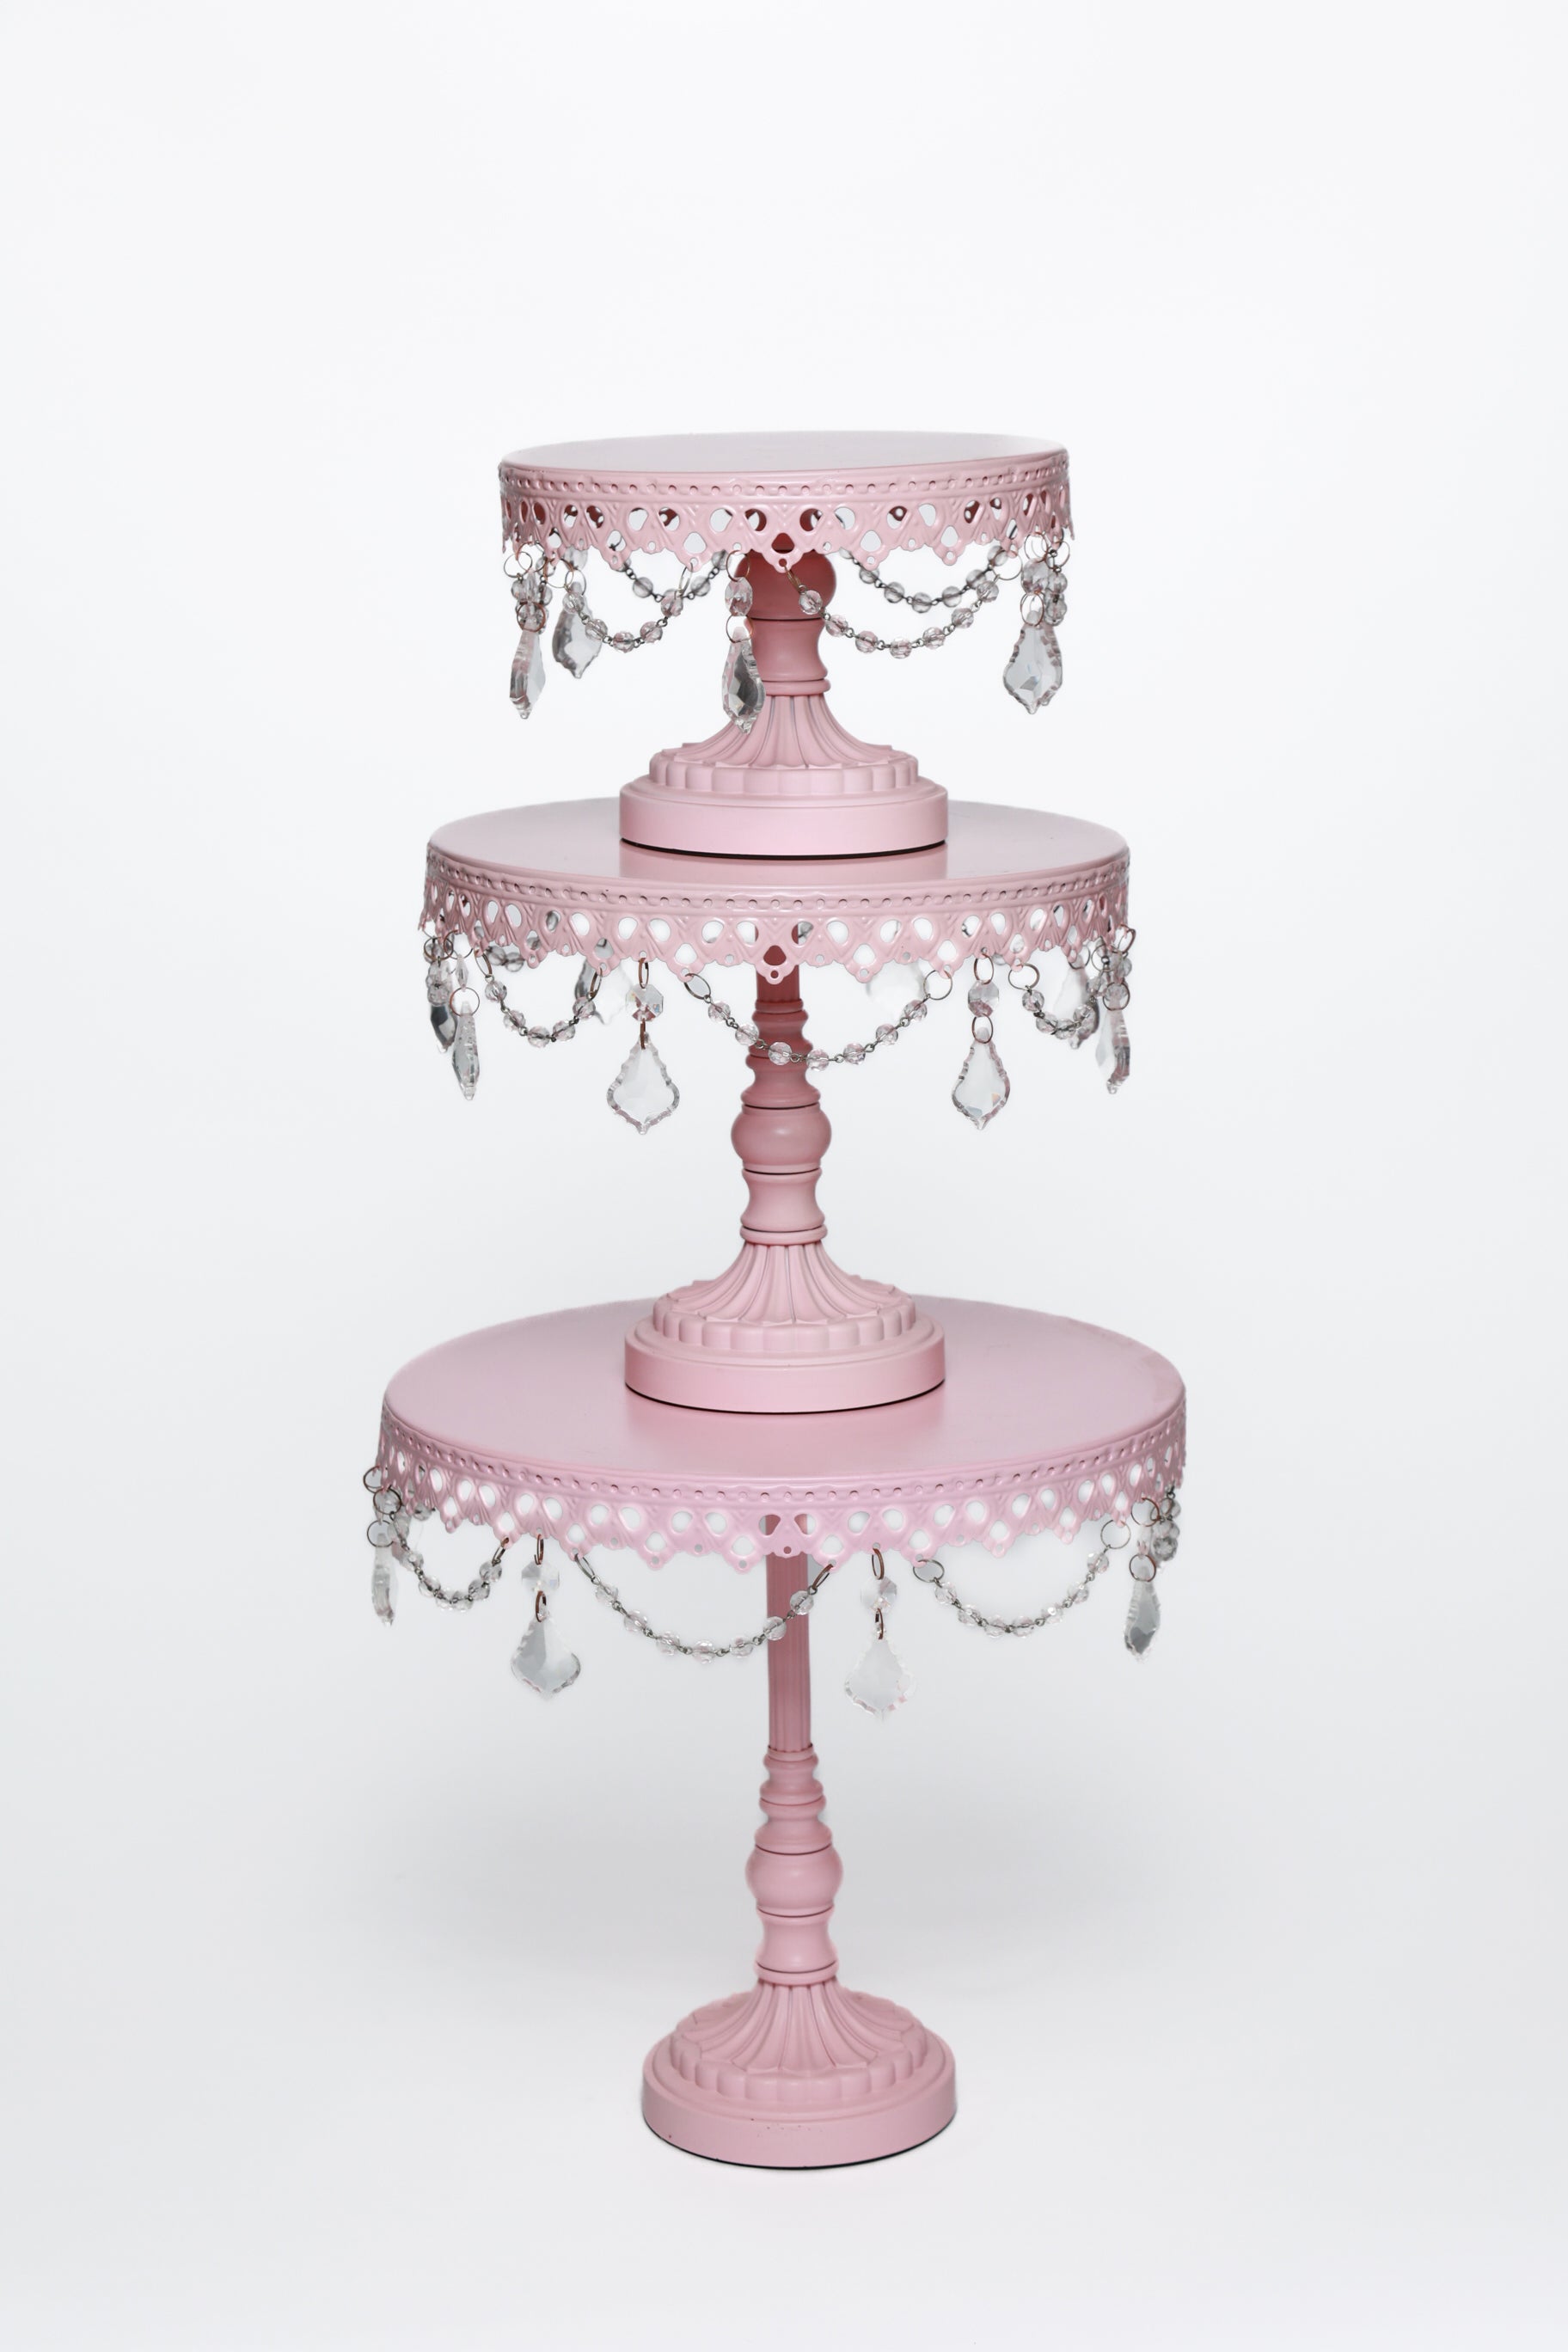 Roselace' 3-Tier Cake Stand - Pink